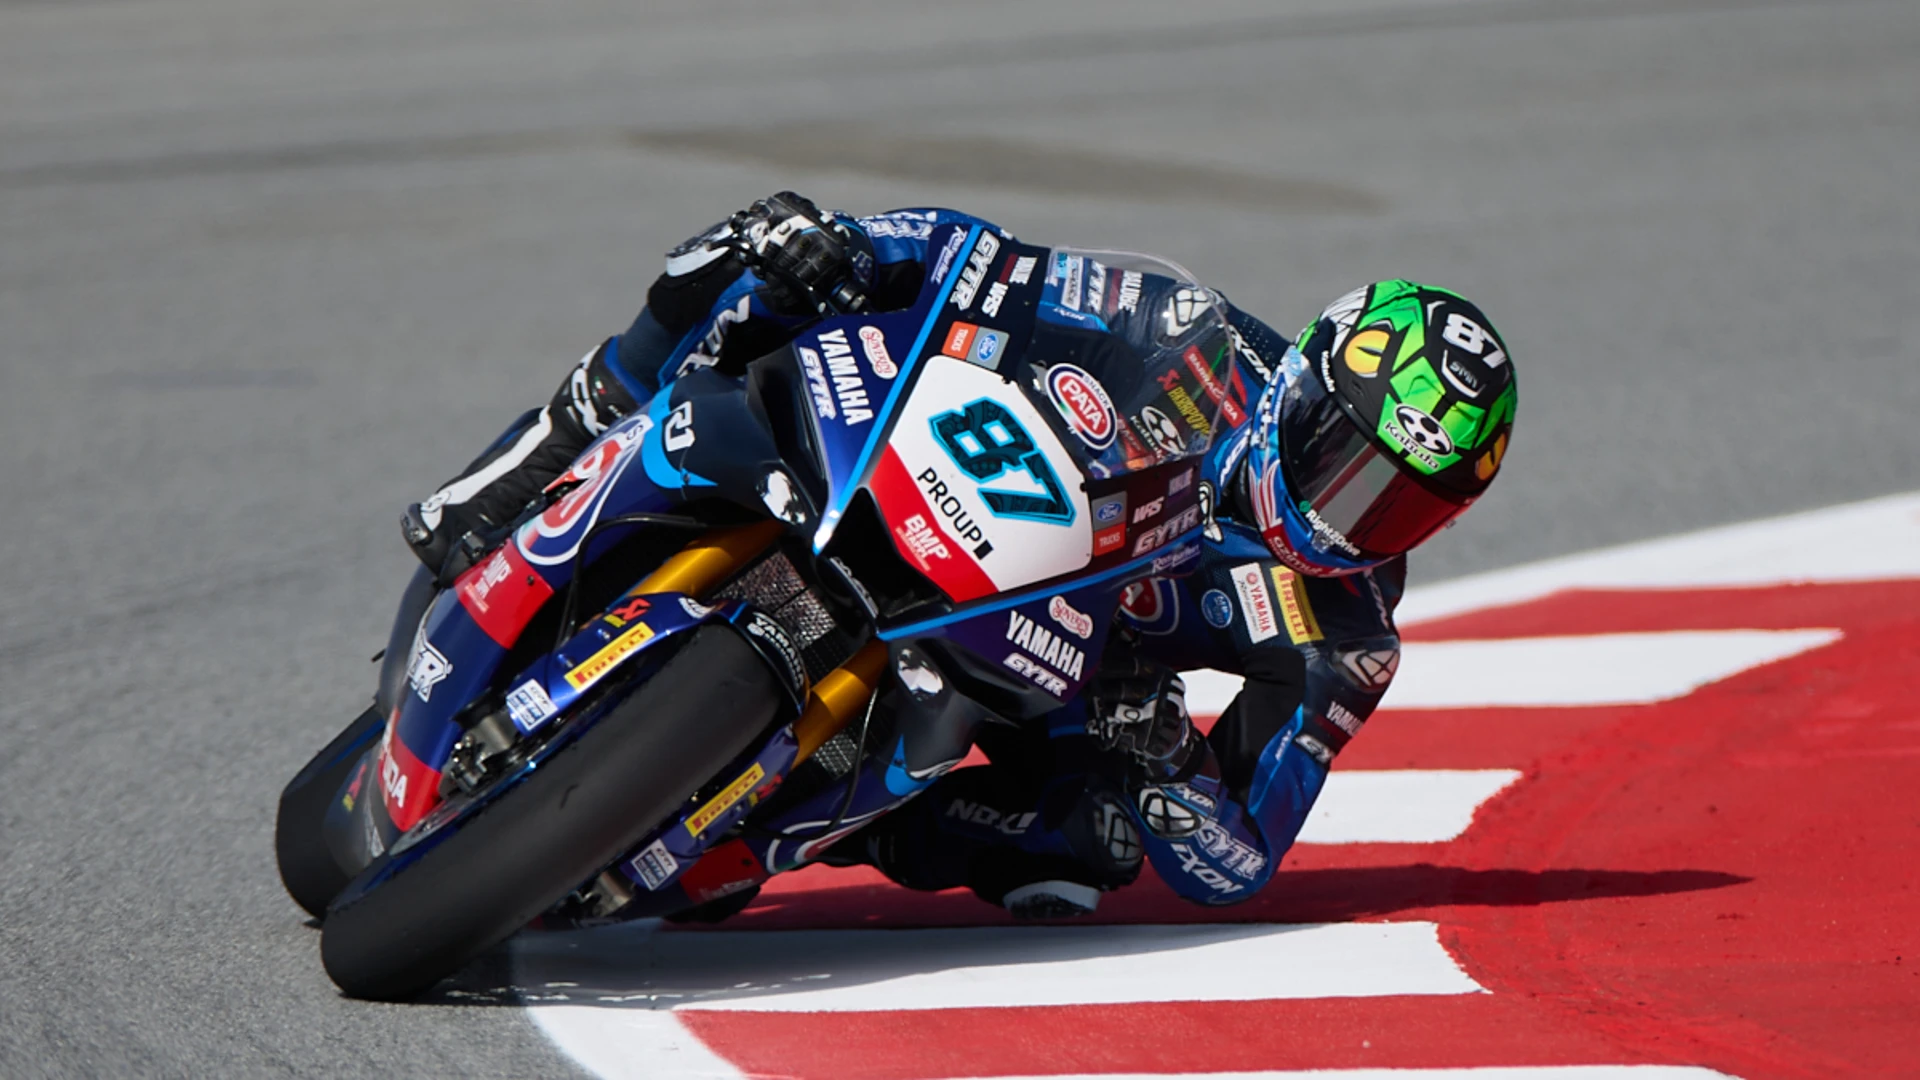 Gardner to stand in for Yamaha's injured Rins in Germany